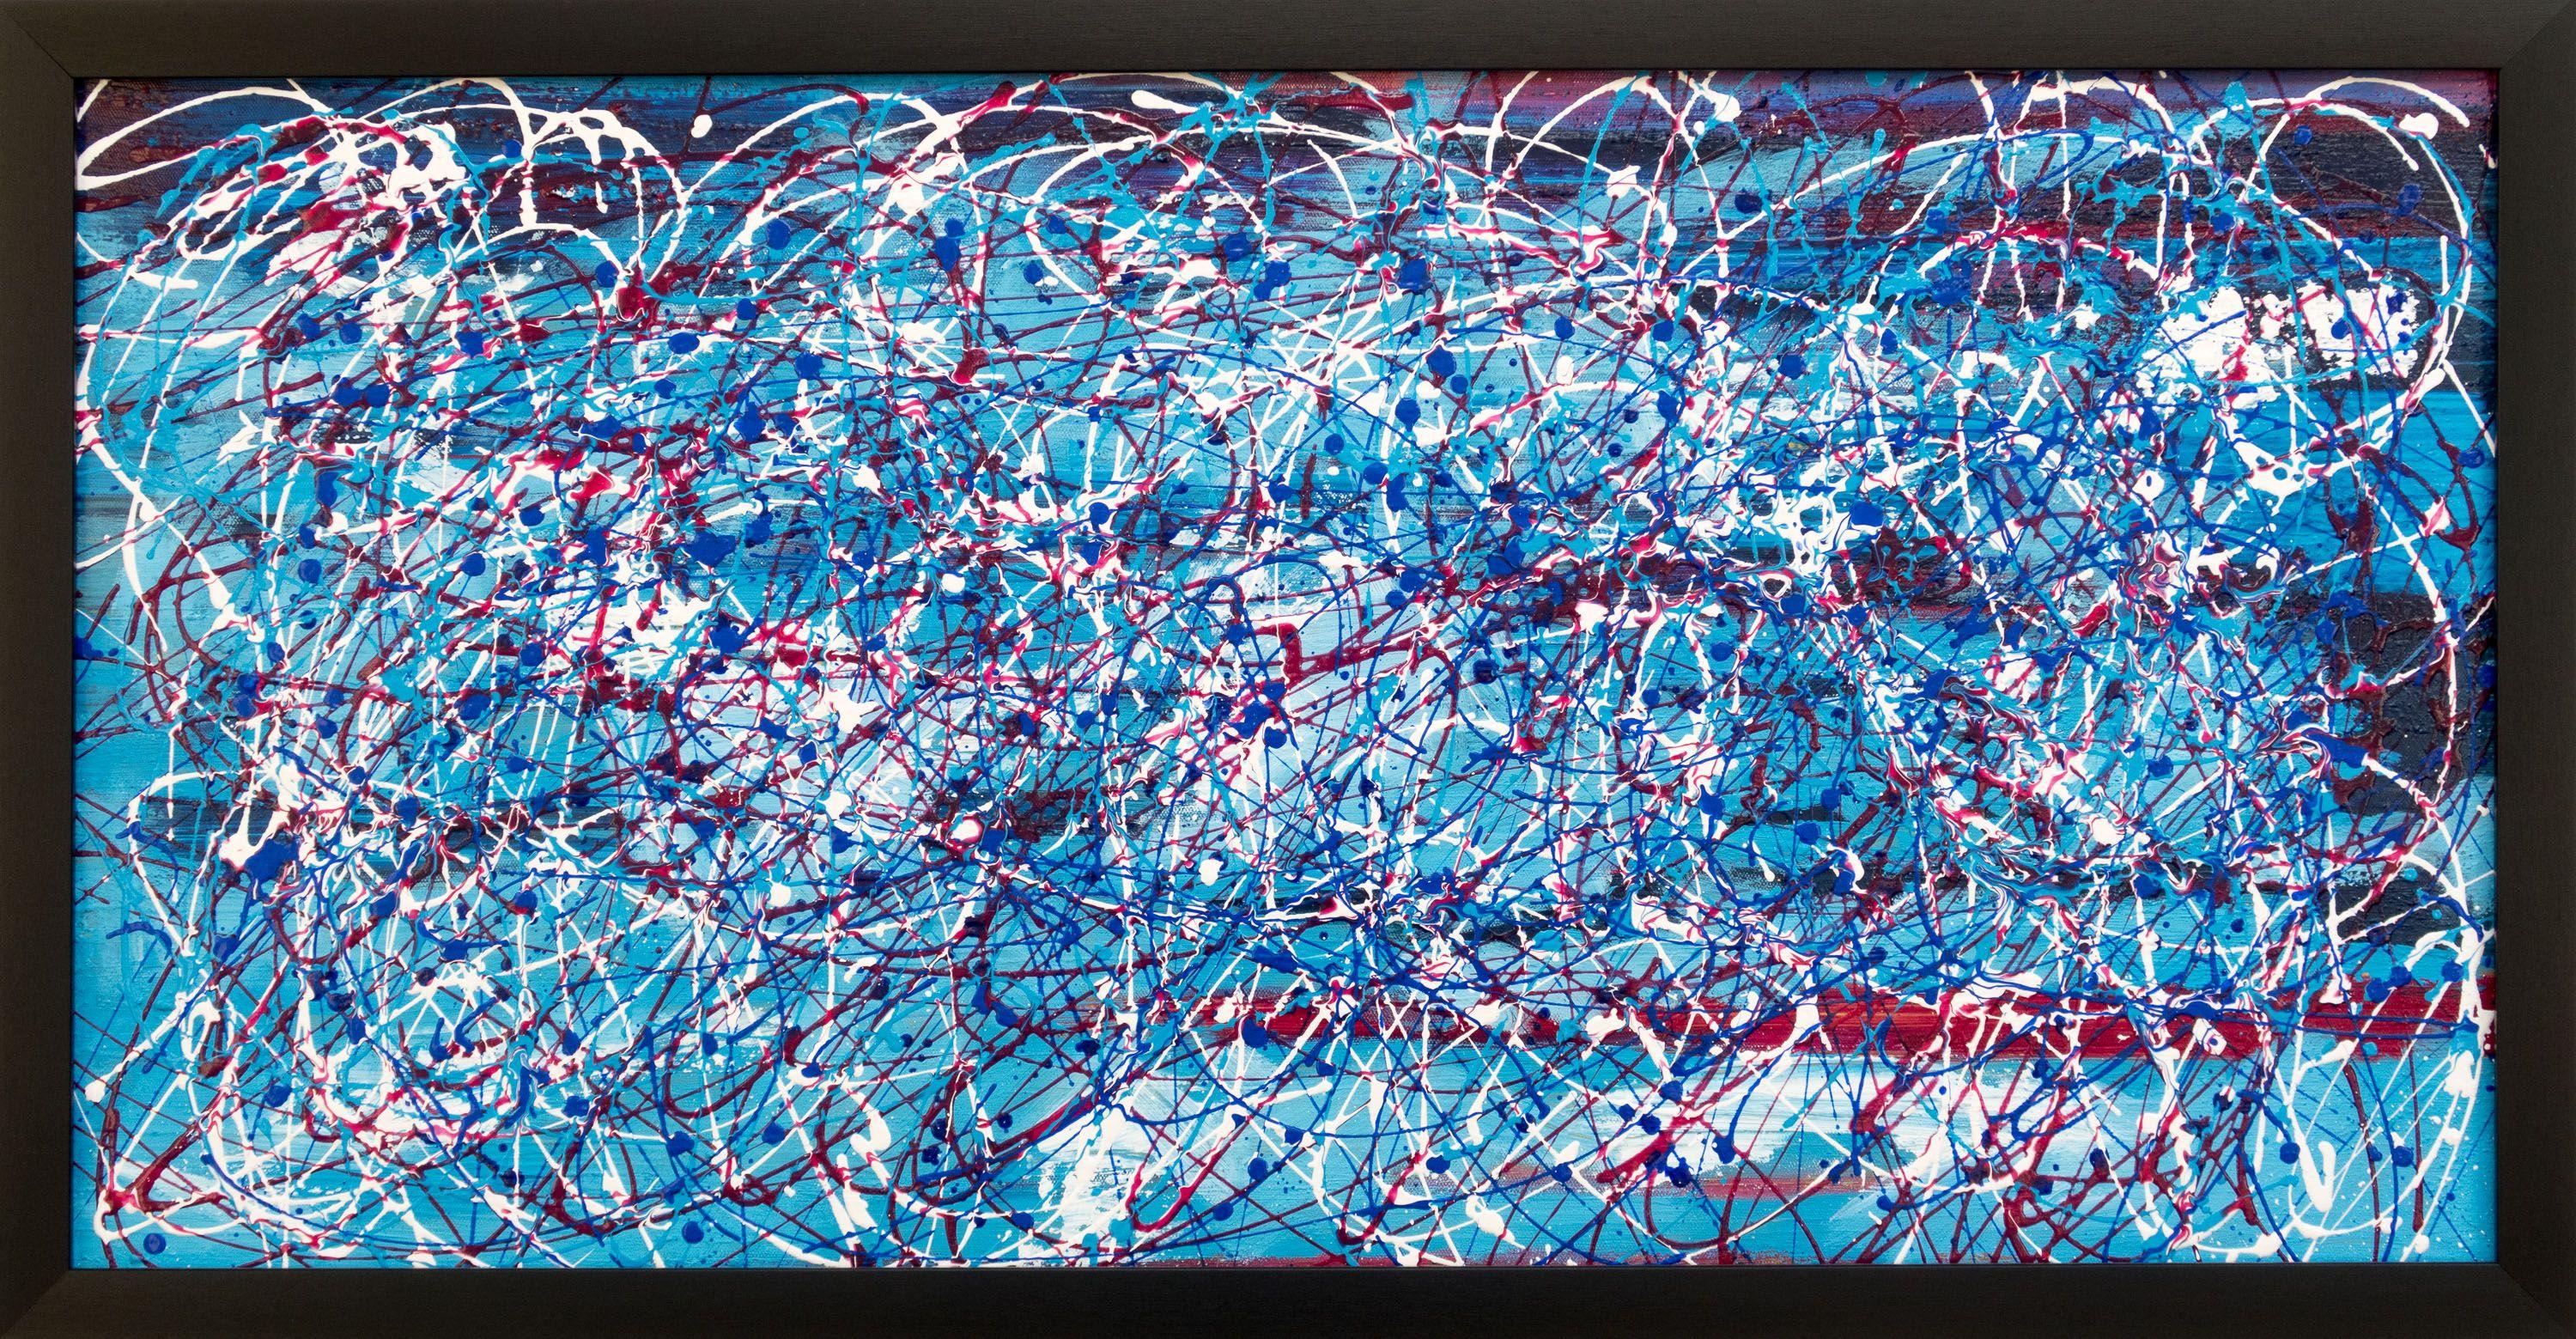 Wonderful blue, red and white action painting in the style of The New York School of painting circa 1950.  This painting can be hung landscape or portrait and comes in a black frame.    This blue and white painting would make a stunning focal point